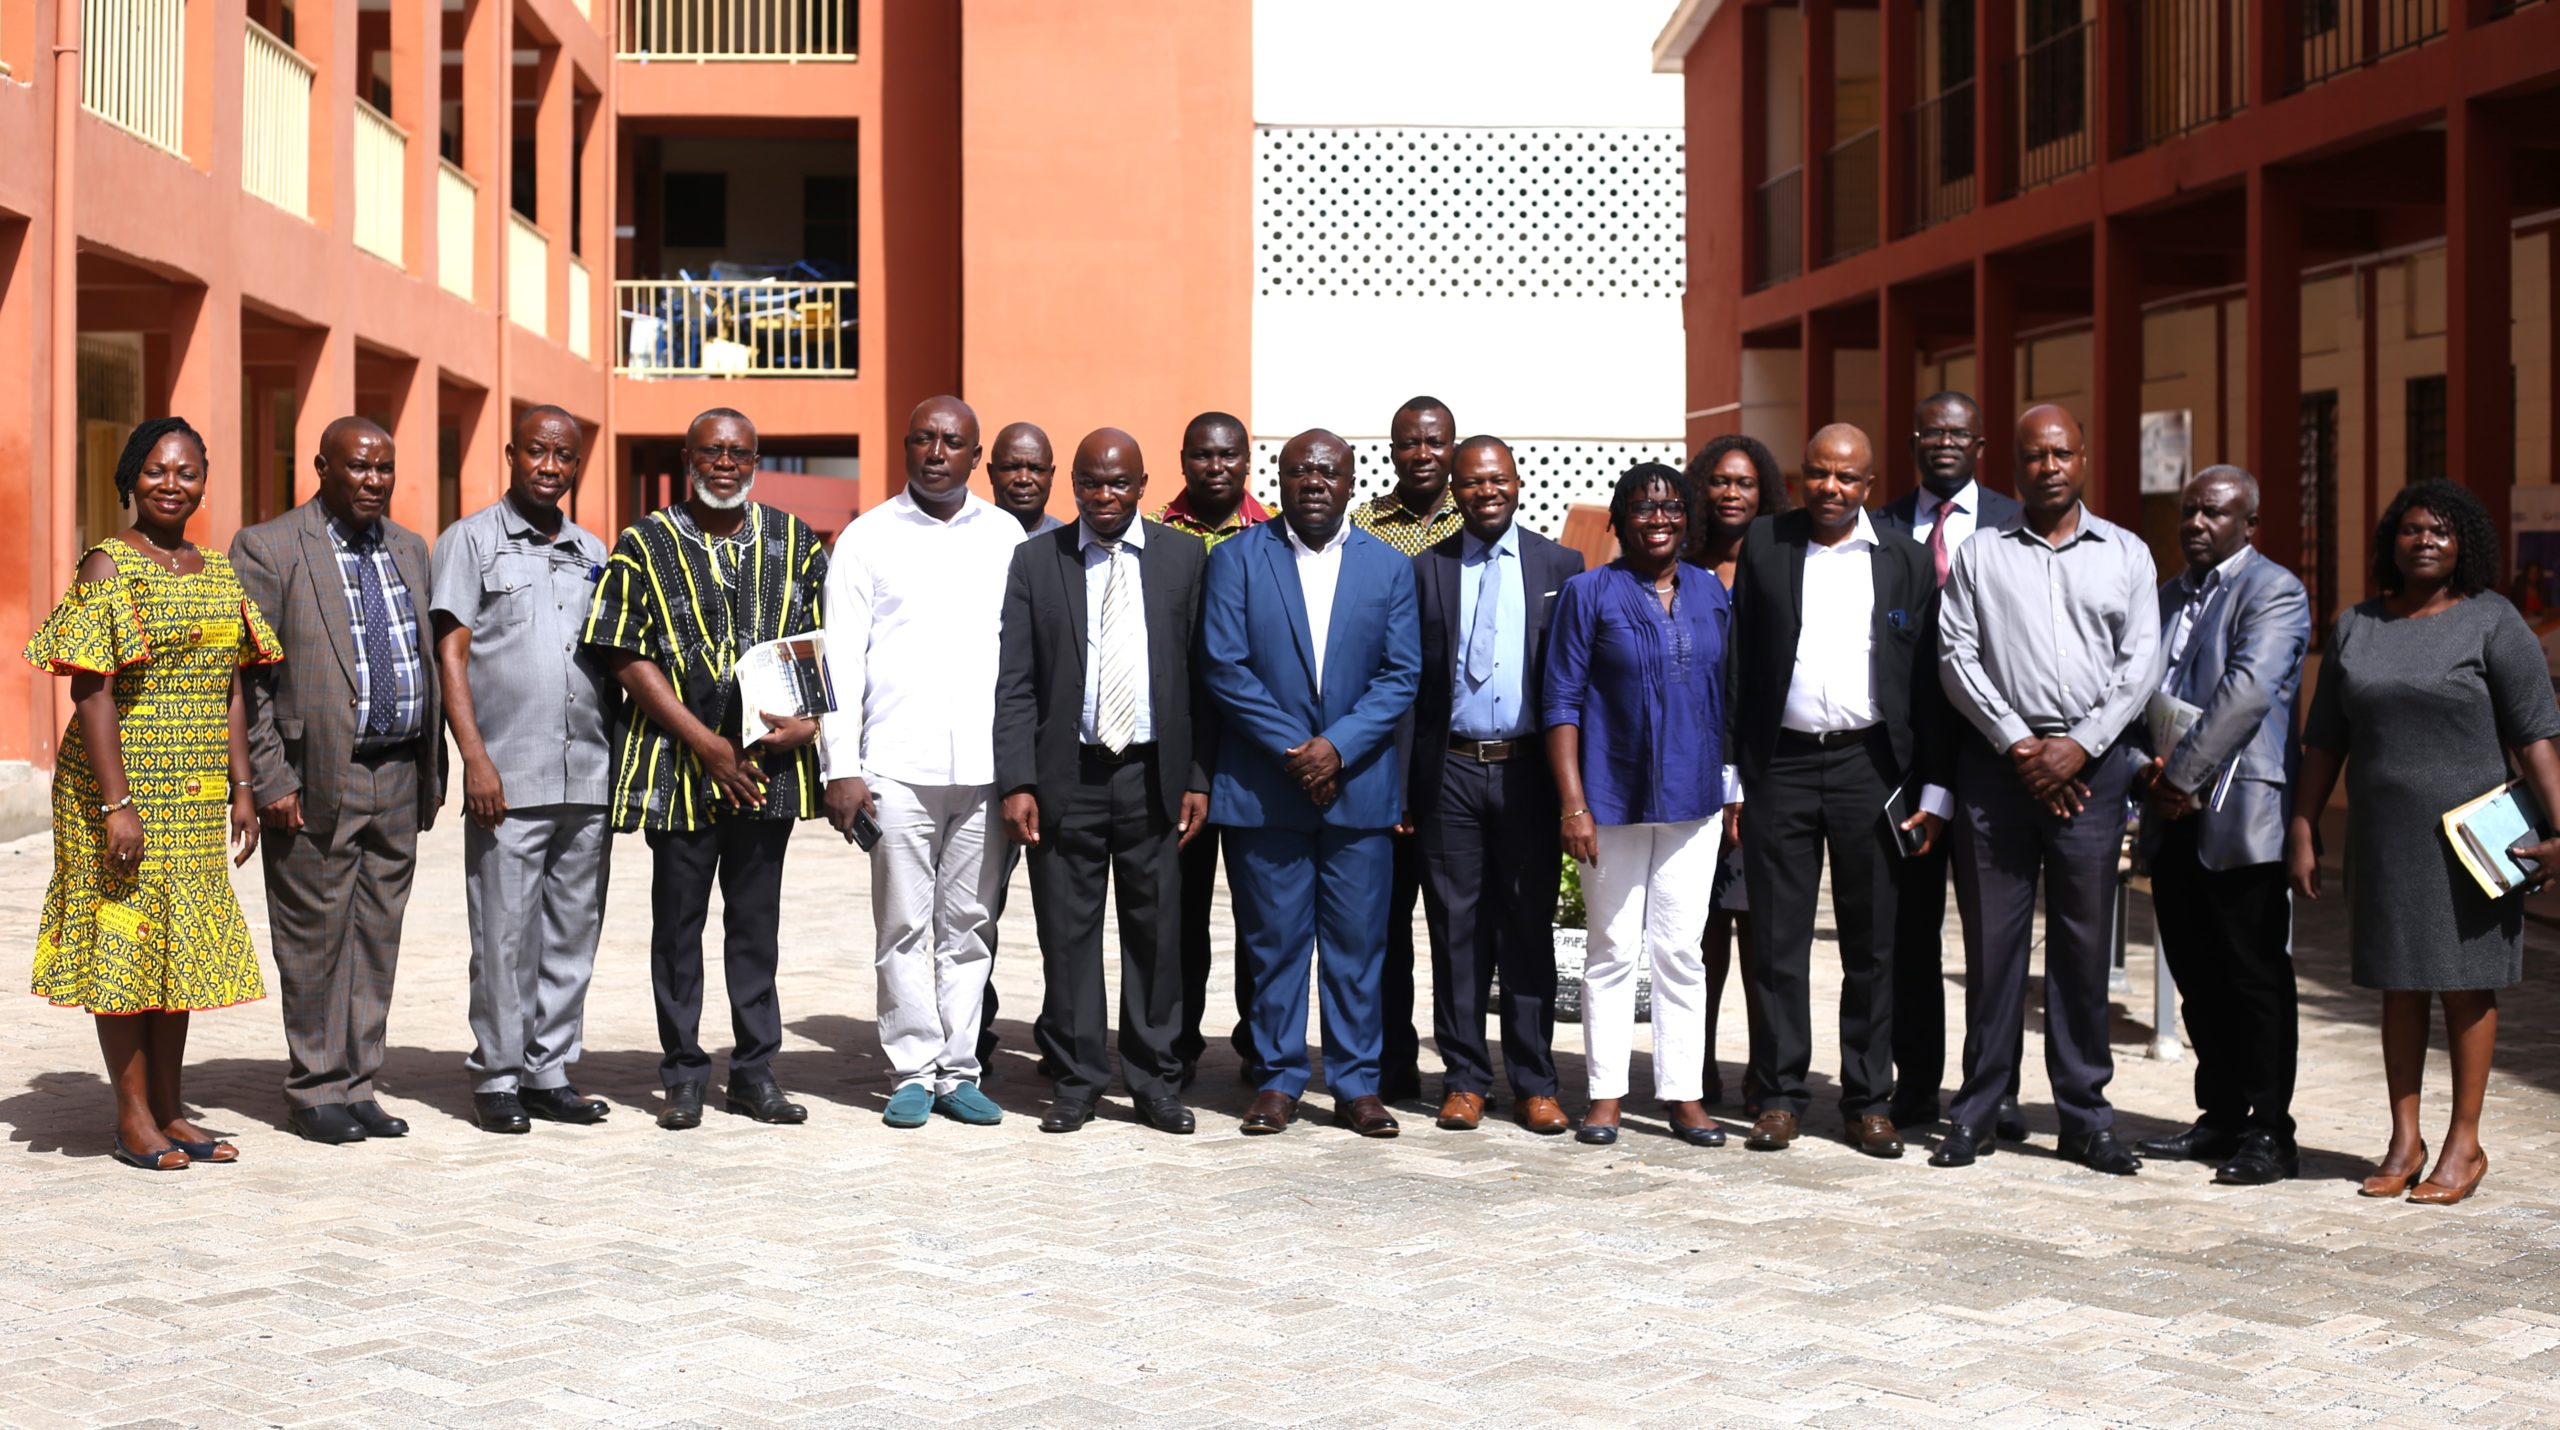 5-MEMBER HIT DELEGATION FROM ZIMBABWE VISITS TTU IN-LINE WITH